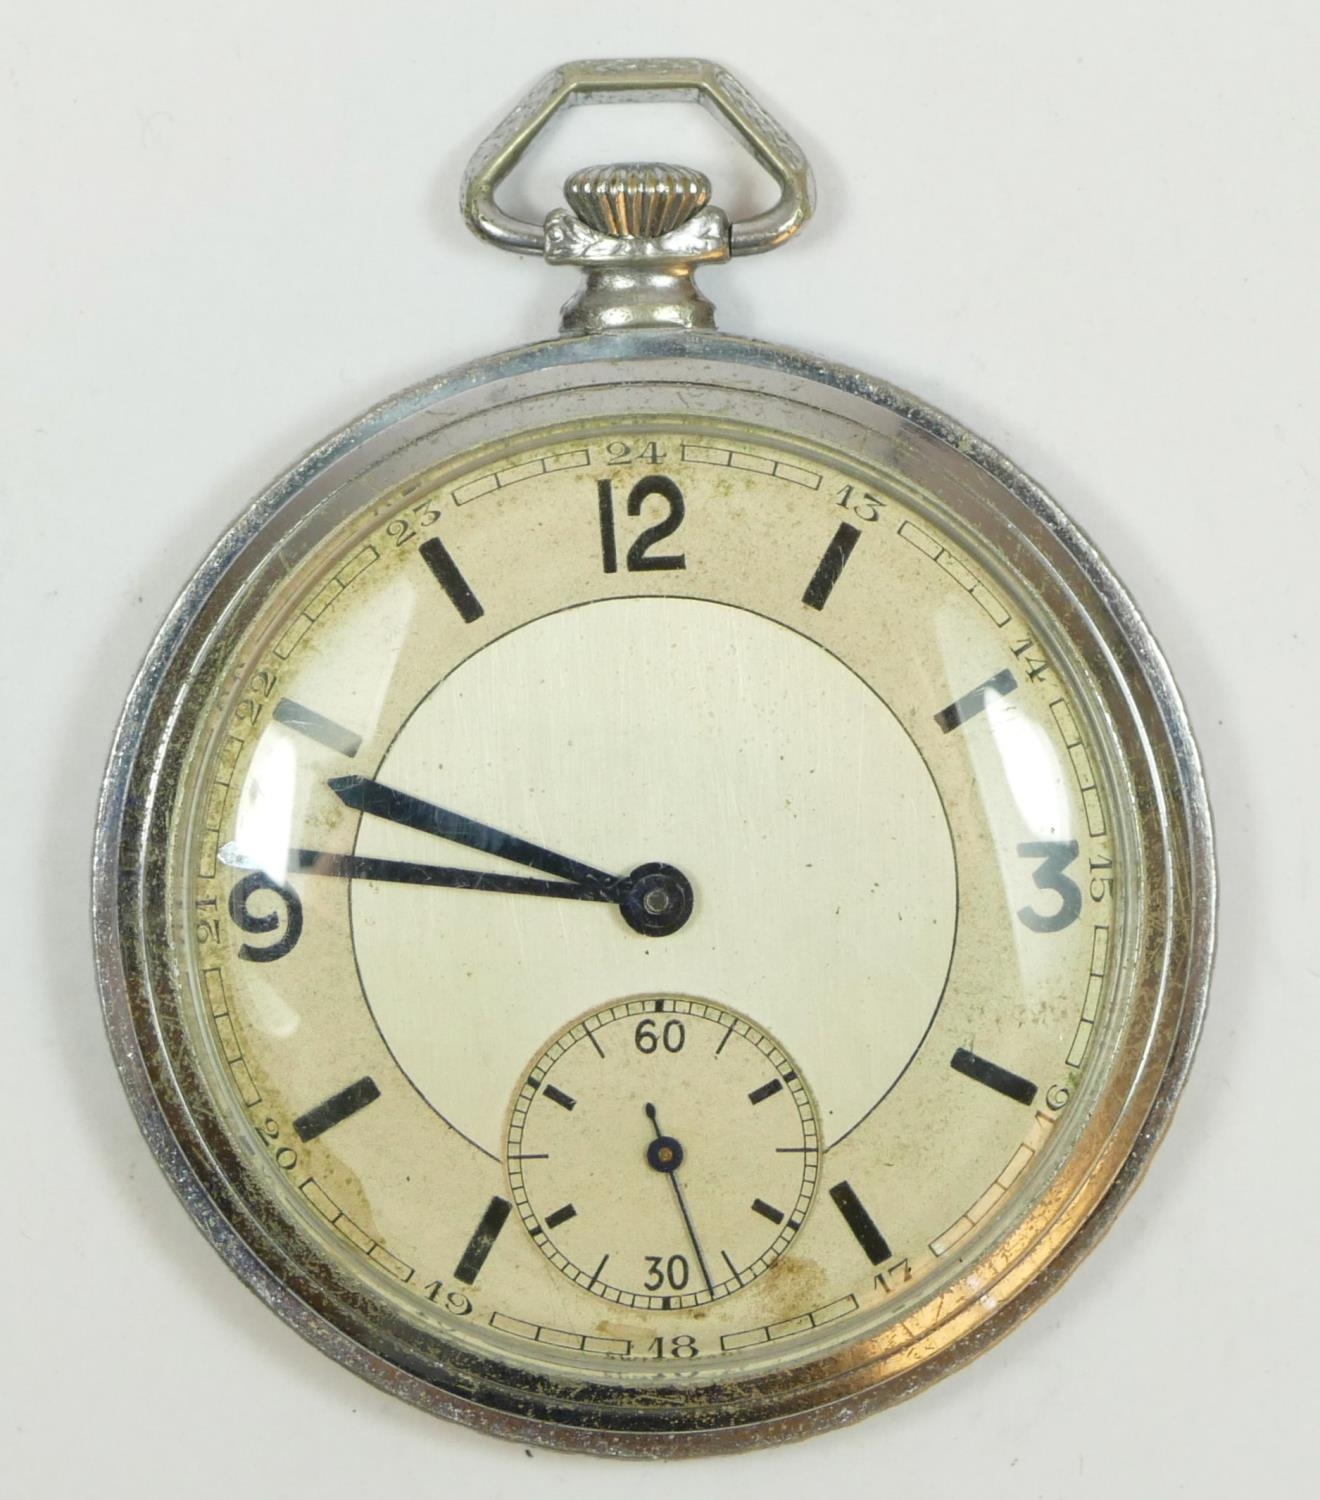 A 1940's chrome plated open face keyless wind pocket watch, contained in a burr walnut desk case. - Image 4 of 6